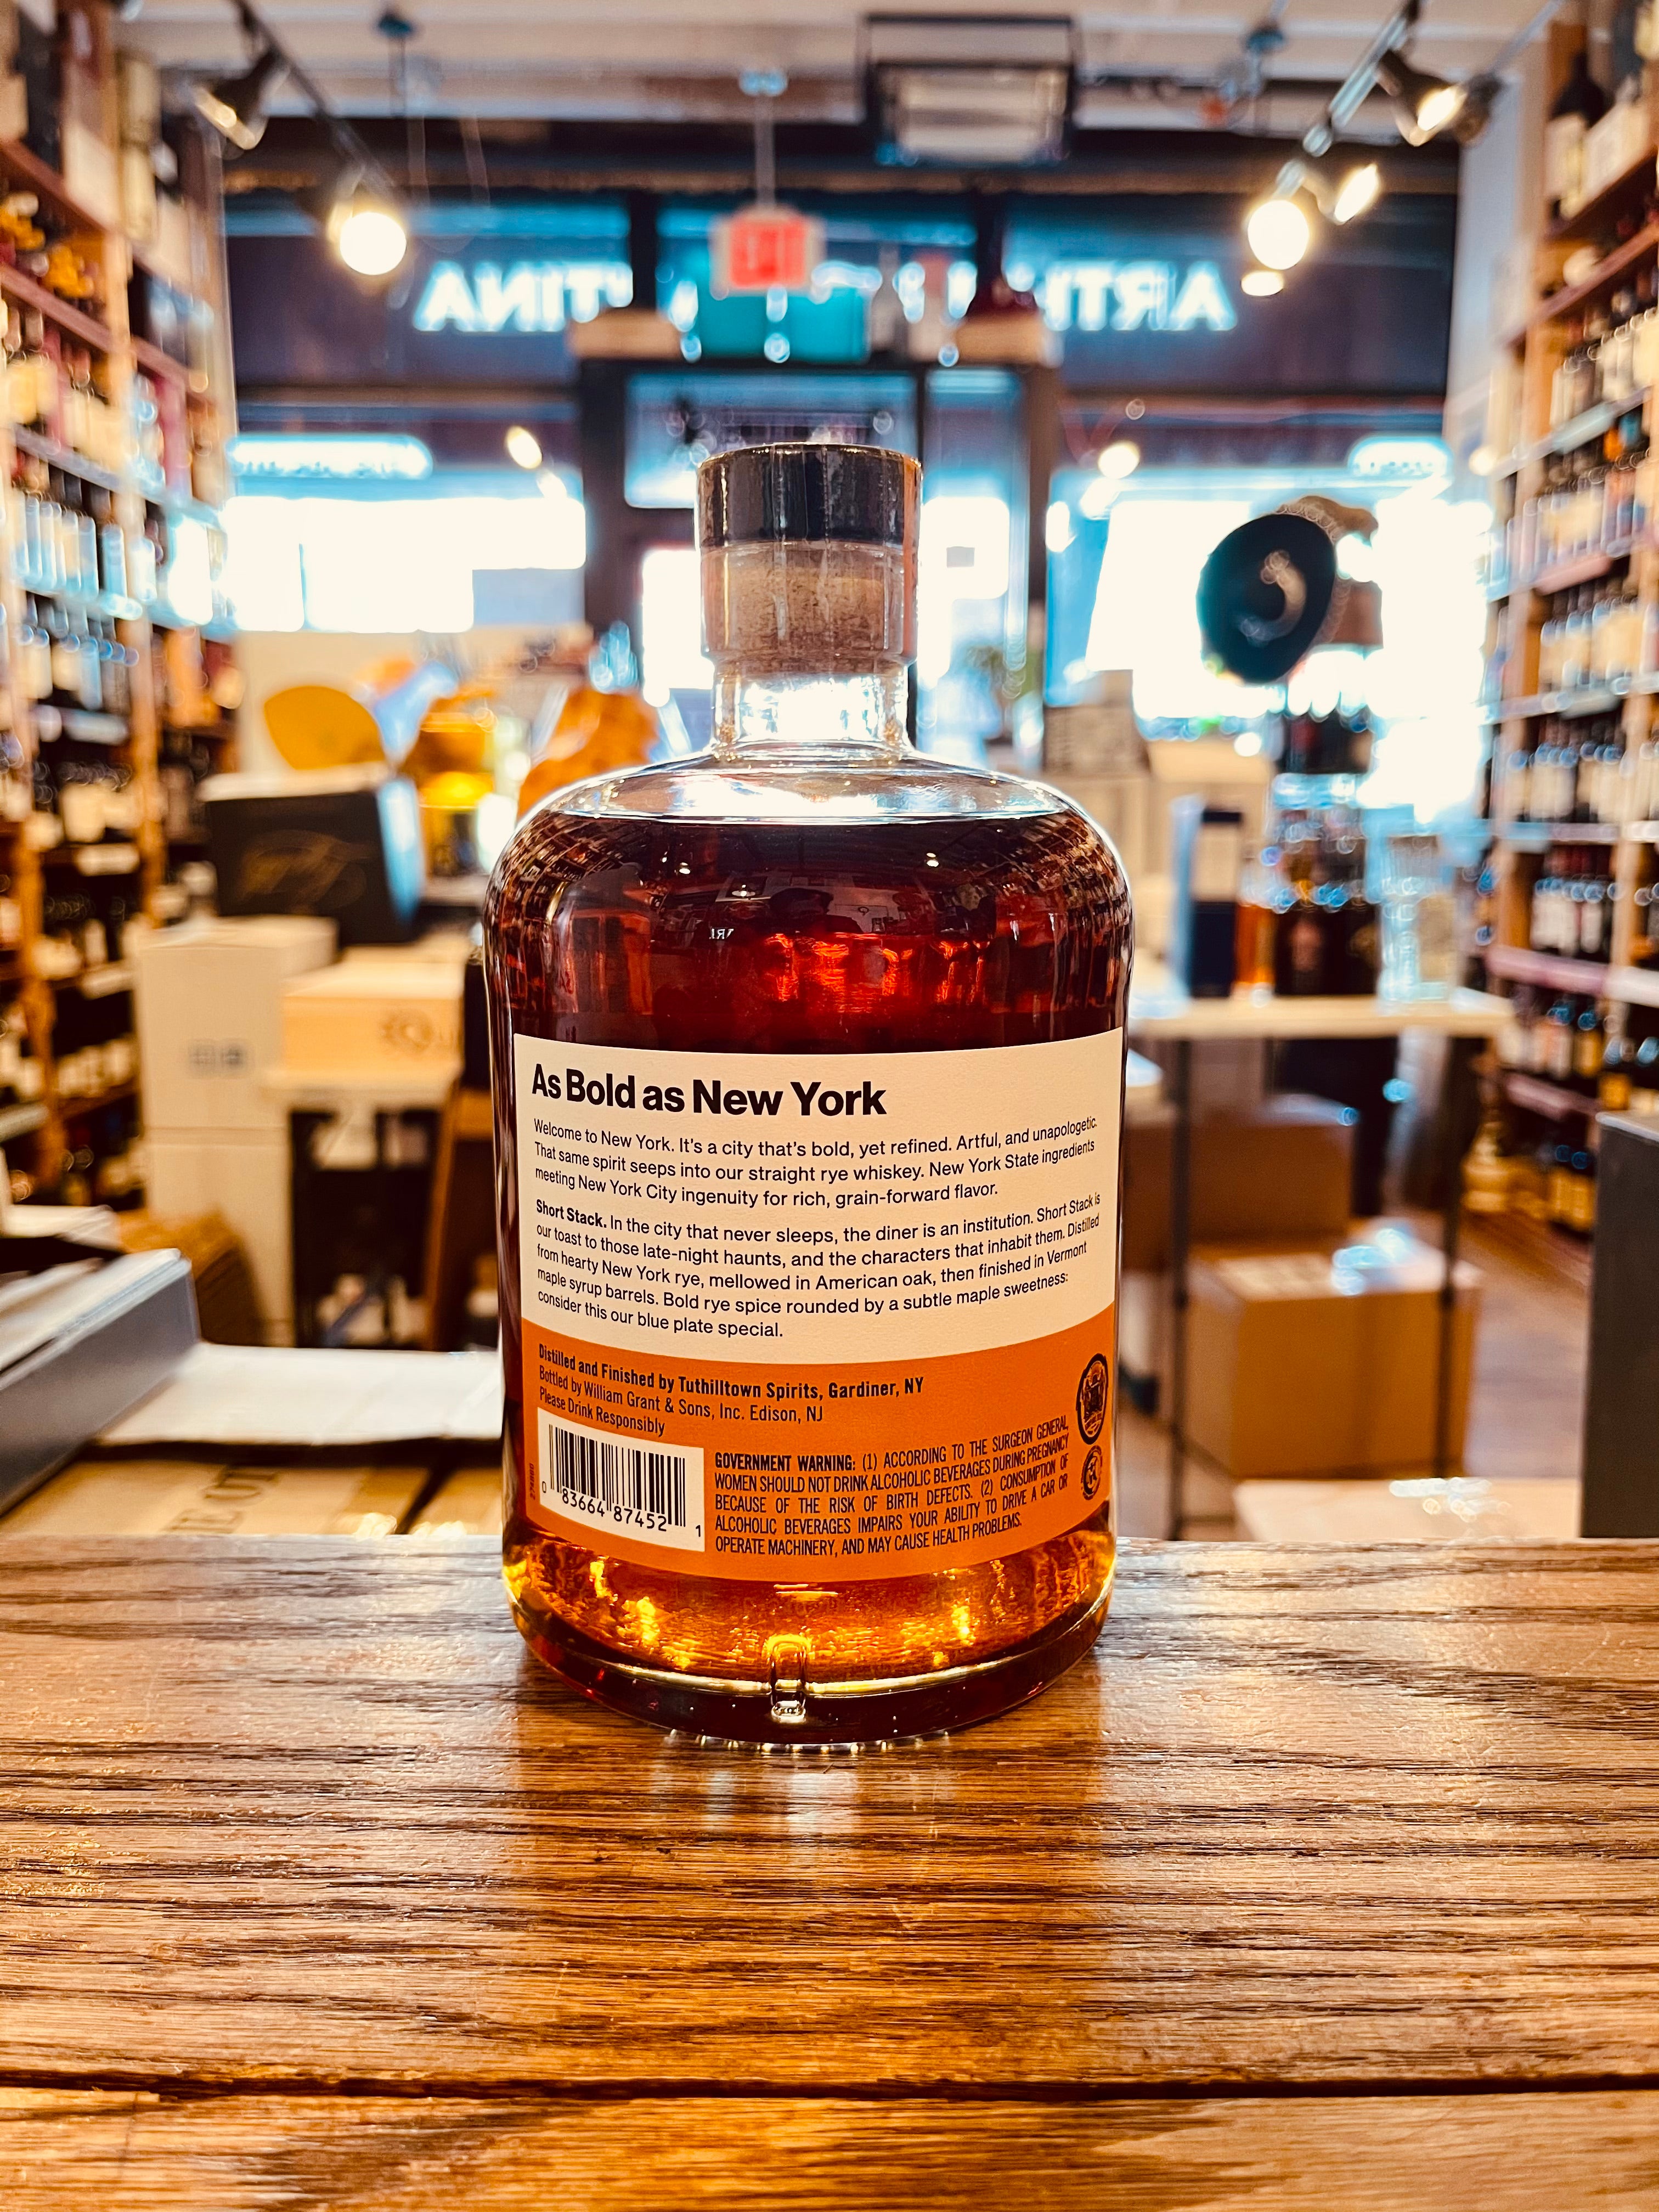 Hudson Whiskey NY Short Stack Rye 750mL the backside of a short squat rounded clear glass bottle with a white and orange label